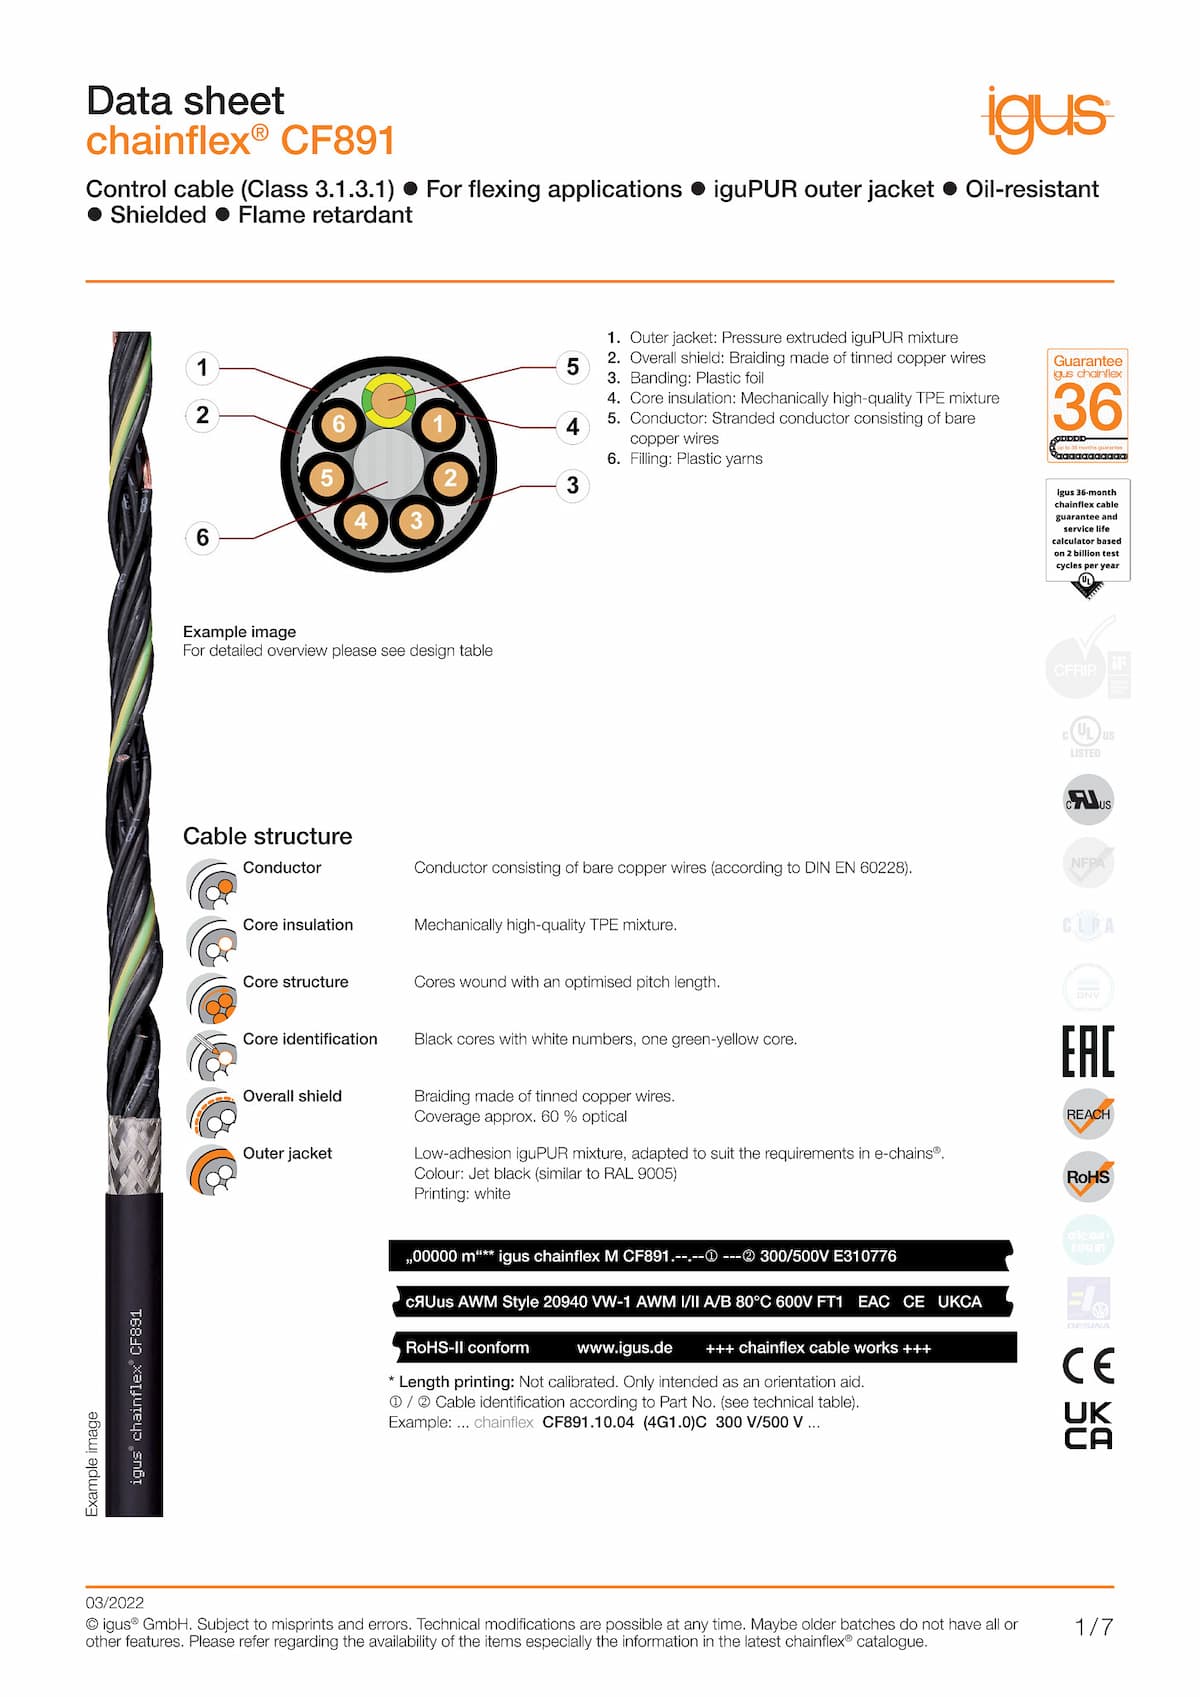 Technical data sheet chainflex® control cable CF891